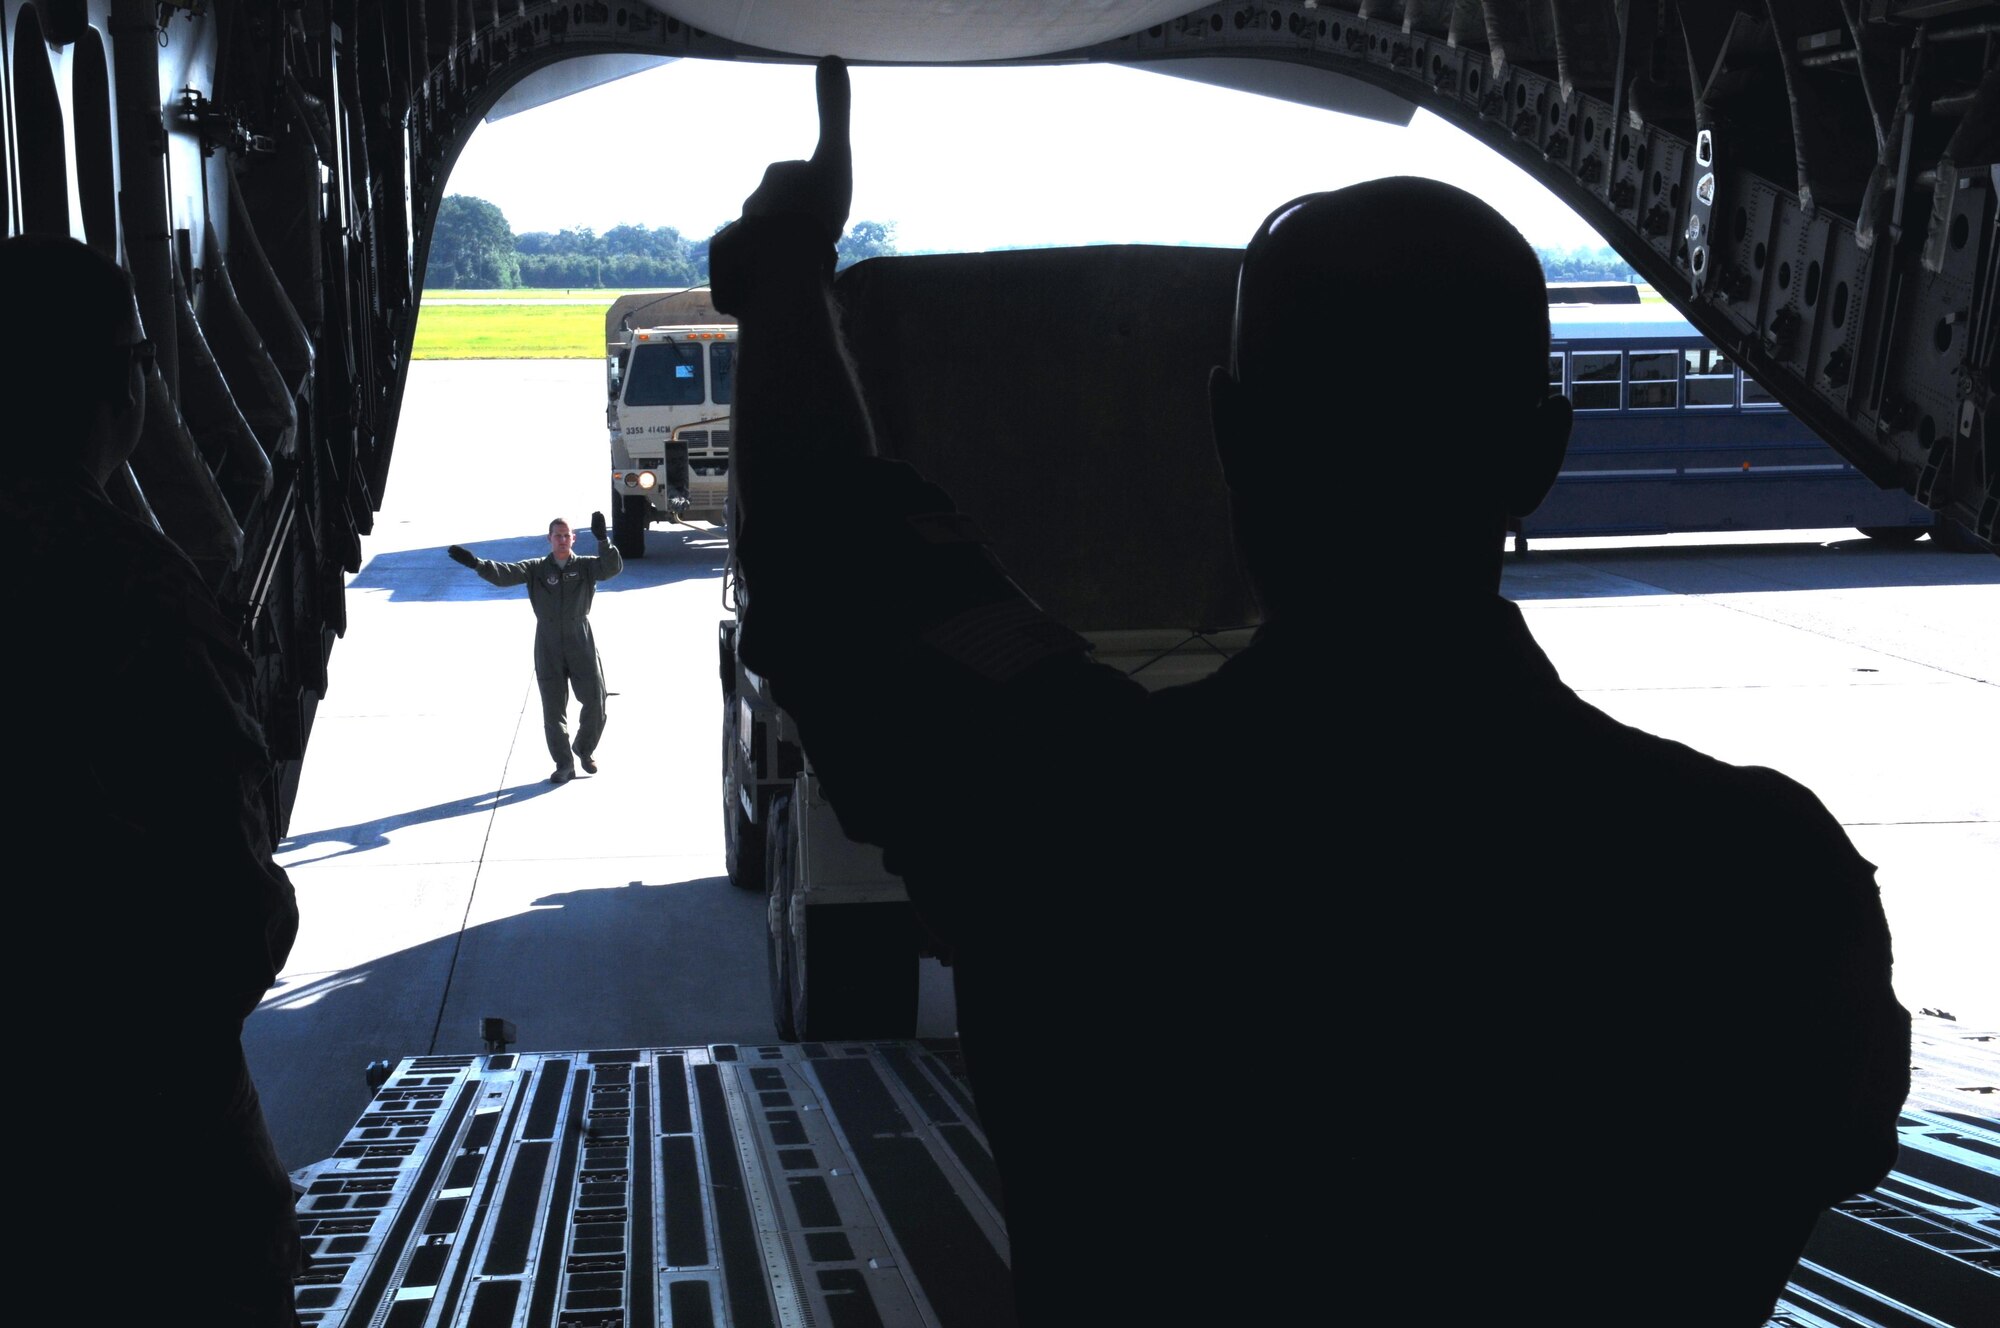 Senior Airman Scott Guerin (left) and Staff Sgt. Doug Wattier of the 317th Airlift Squadron based in Charleston, S.C., use hand signals to direct the loading of a 415th Chemical Brigade Light Medium Tactical Vehicle LMTV into the cargo hold of a Boeing C-17 Globe master on August 15th 2015 in support of Operation Red Dragon. Red Dragon is a Civil Defense readiness exercise, which incorporates Army Reserve and National Guard Soldiers with civilian first responder agencies such as fire departments, police departments and hospitals to improve capabilities in large-scale chemical defense operations. (U.S. Army photo by Sgt. Eben Boothby)